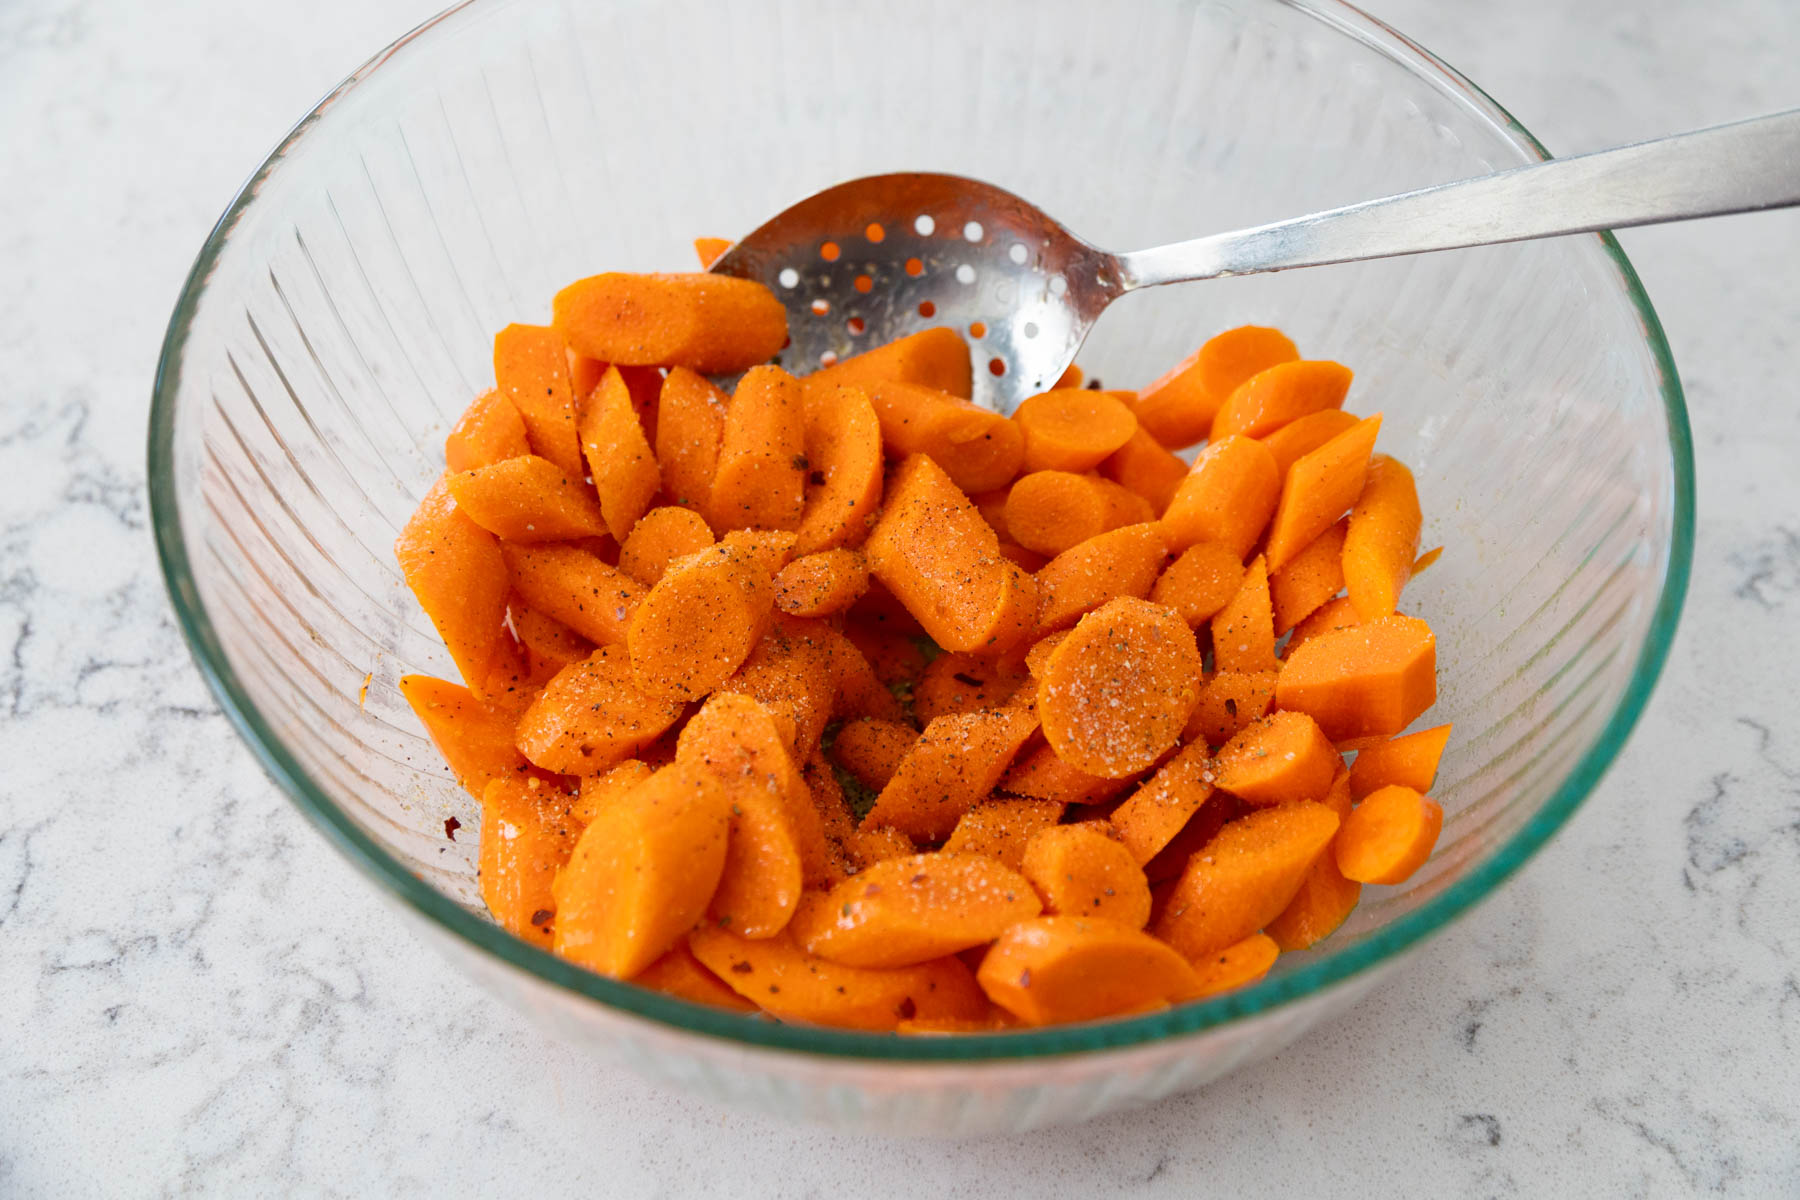 The sliced carrots are in a large mixing bowl being stirred with a spoon.